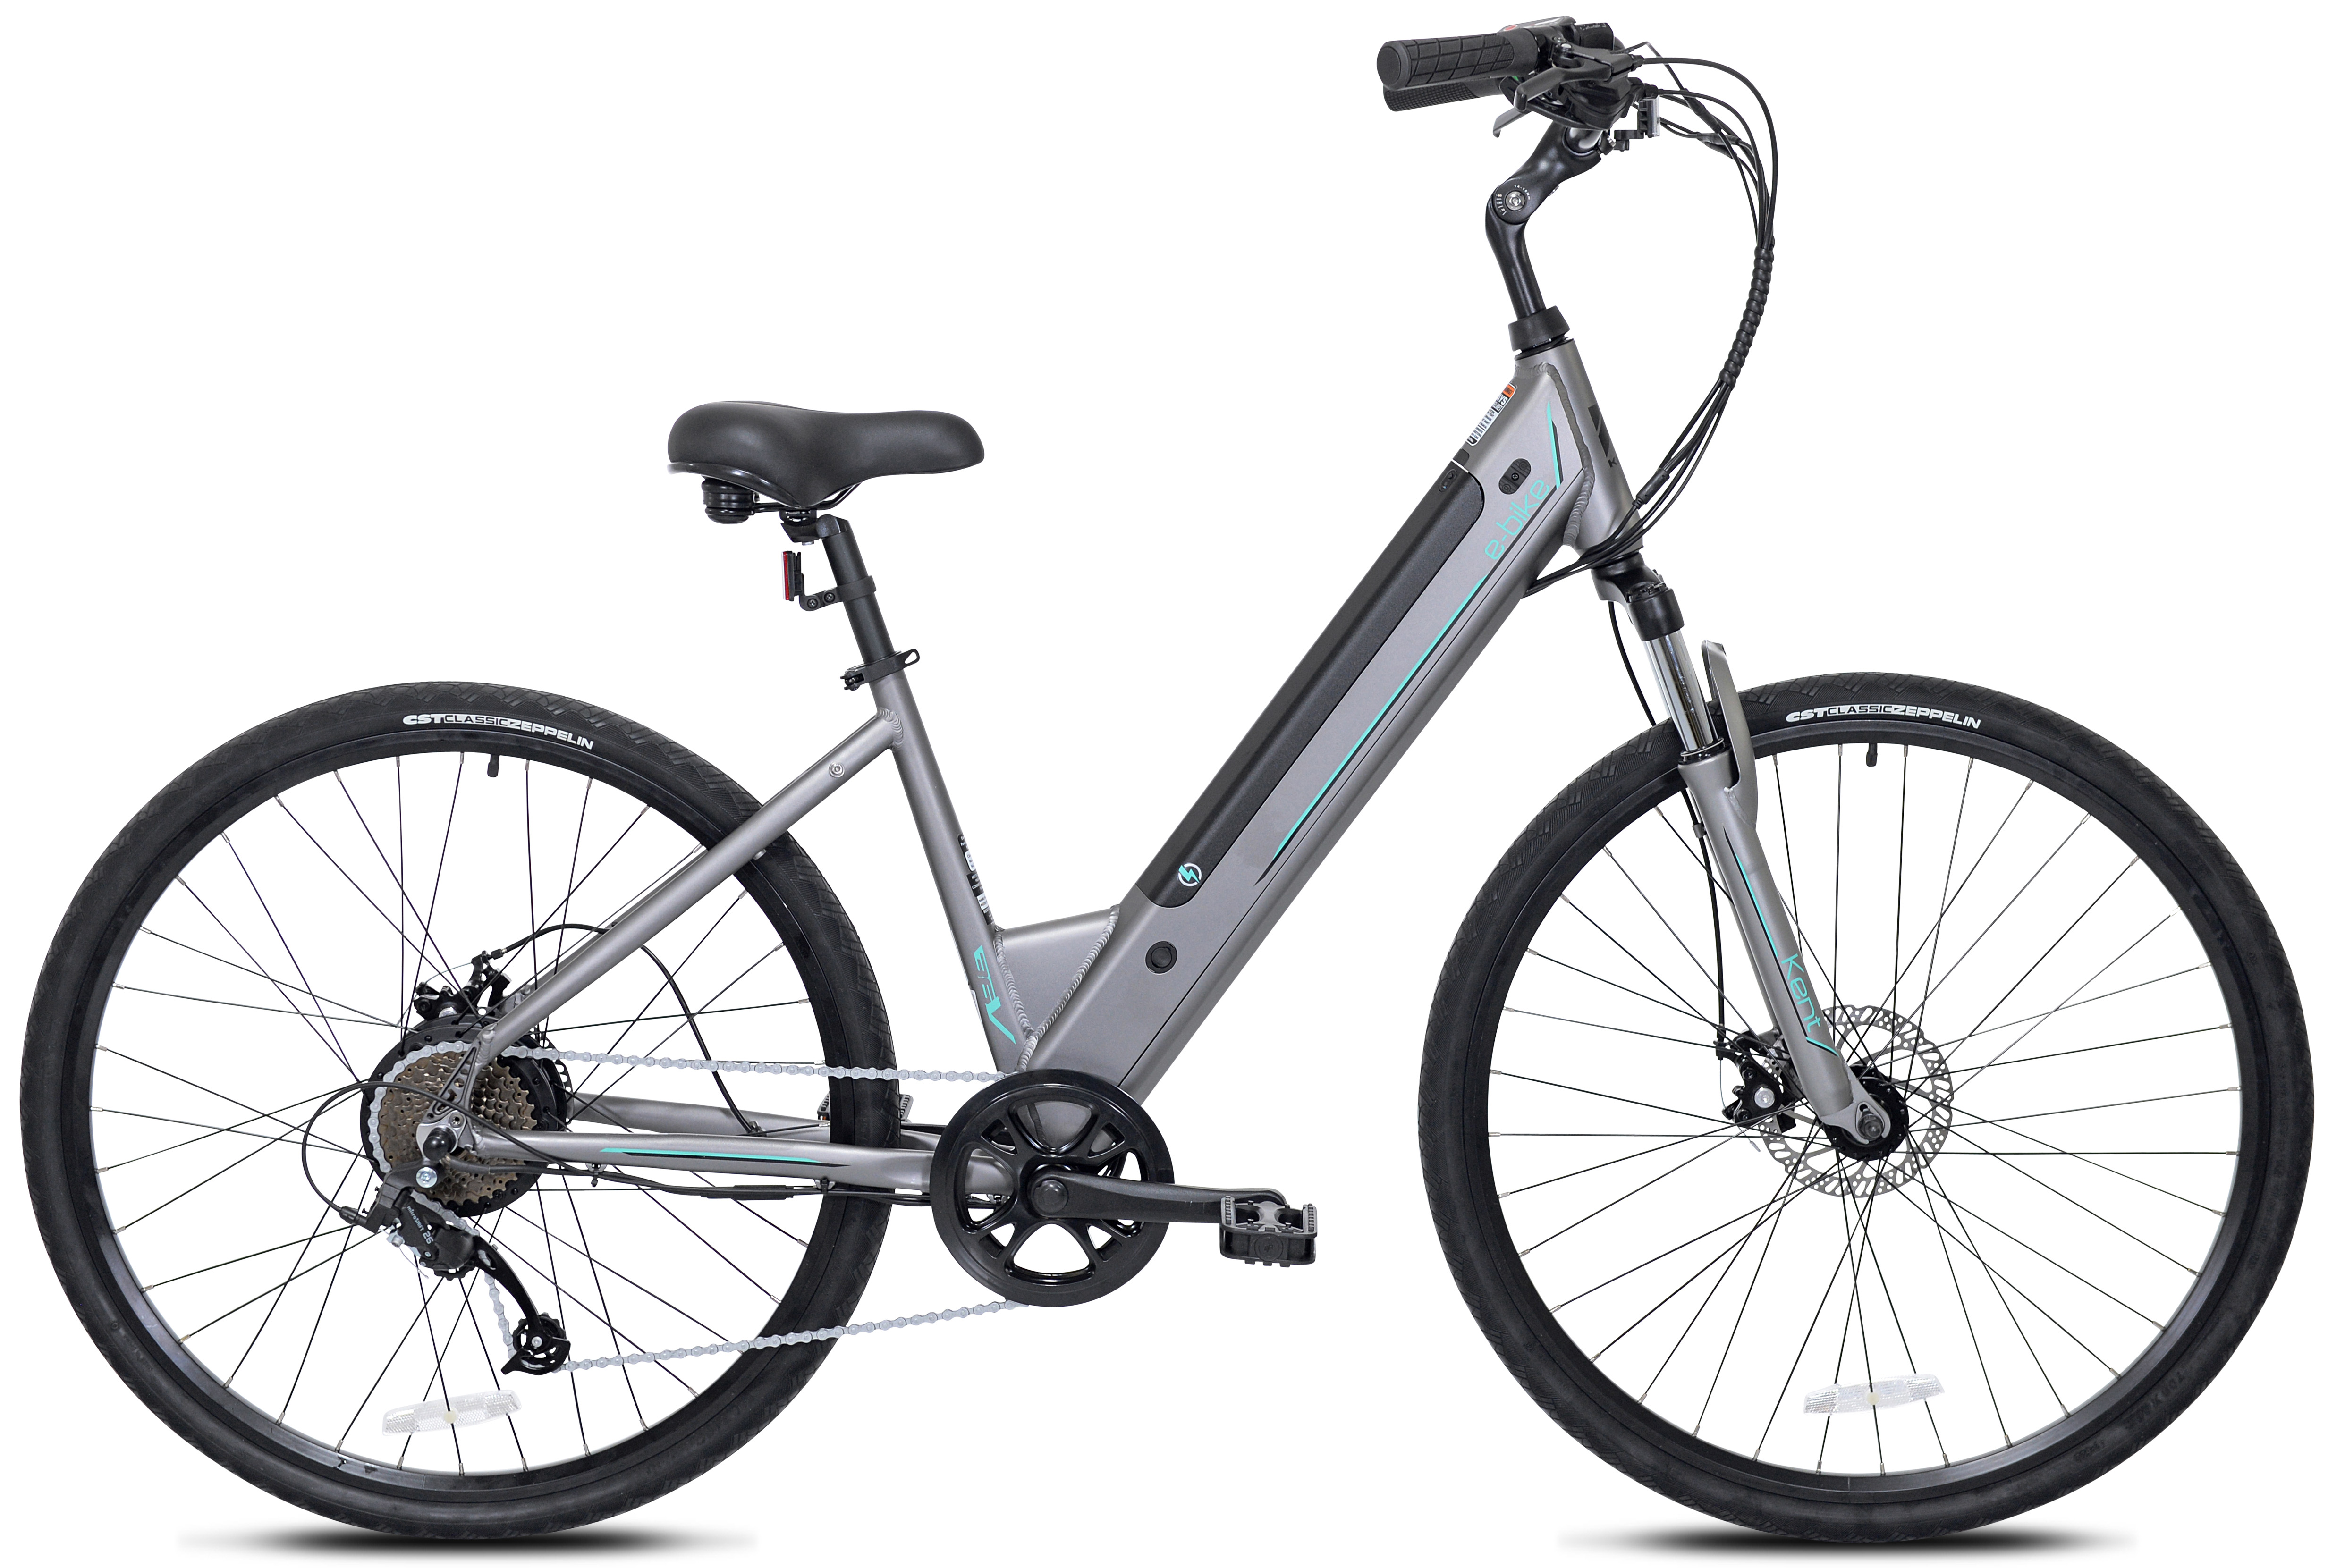 Kent Bicycles 700C 350W Adult Pedal Assist Step-Through Comfort Electric Bicycle, Gray - image 2 of 13